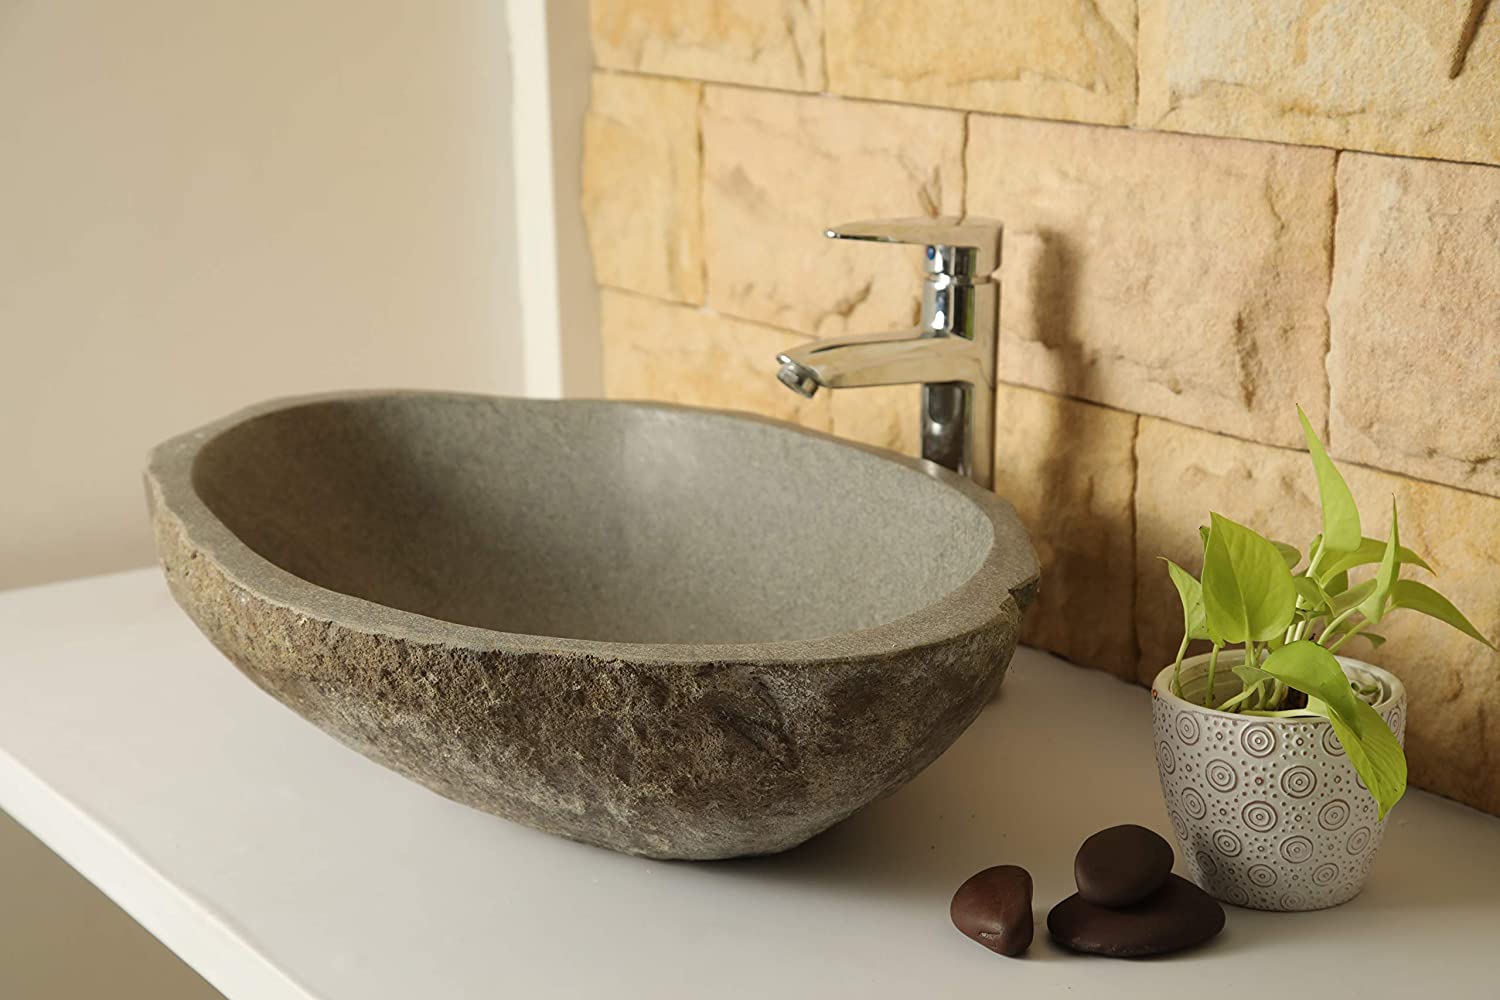 The natural stone vintage wash basin for the parents' room